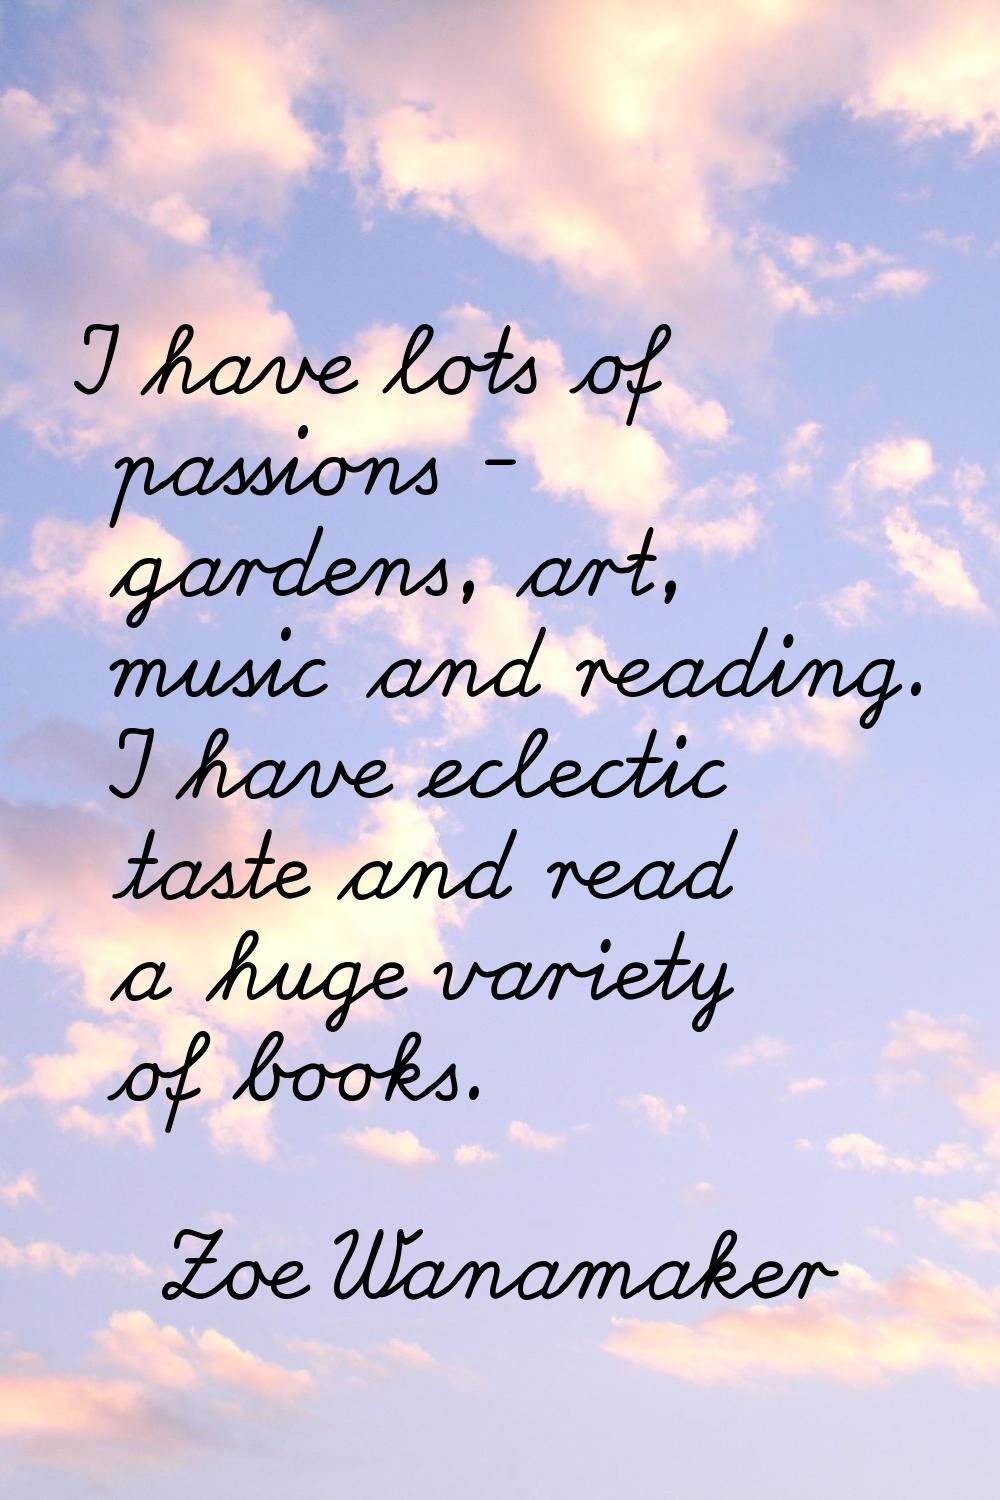 I have lots of passions - gardens, art, music and reading. I have eclectic taste and read a huge va